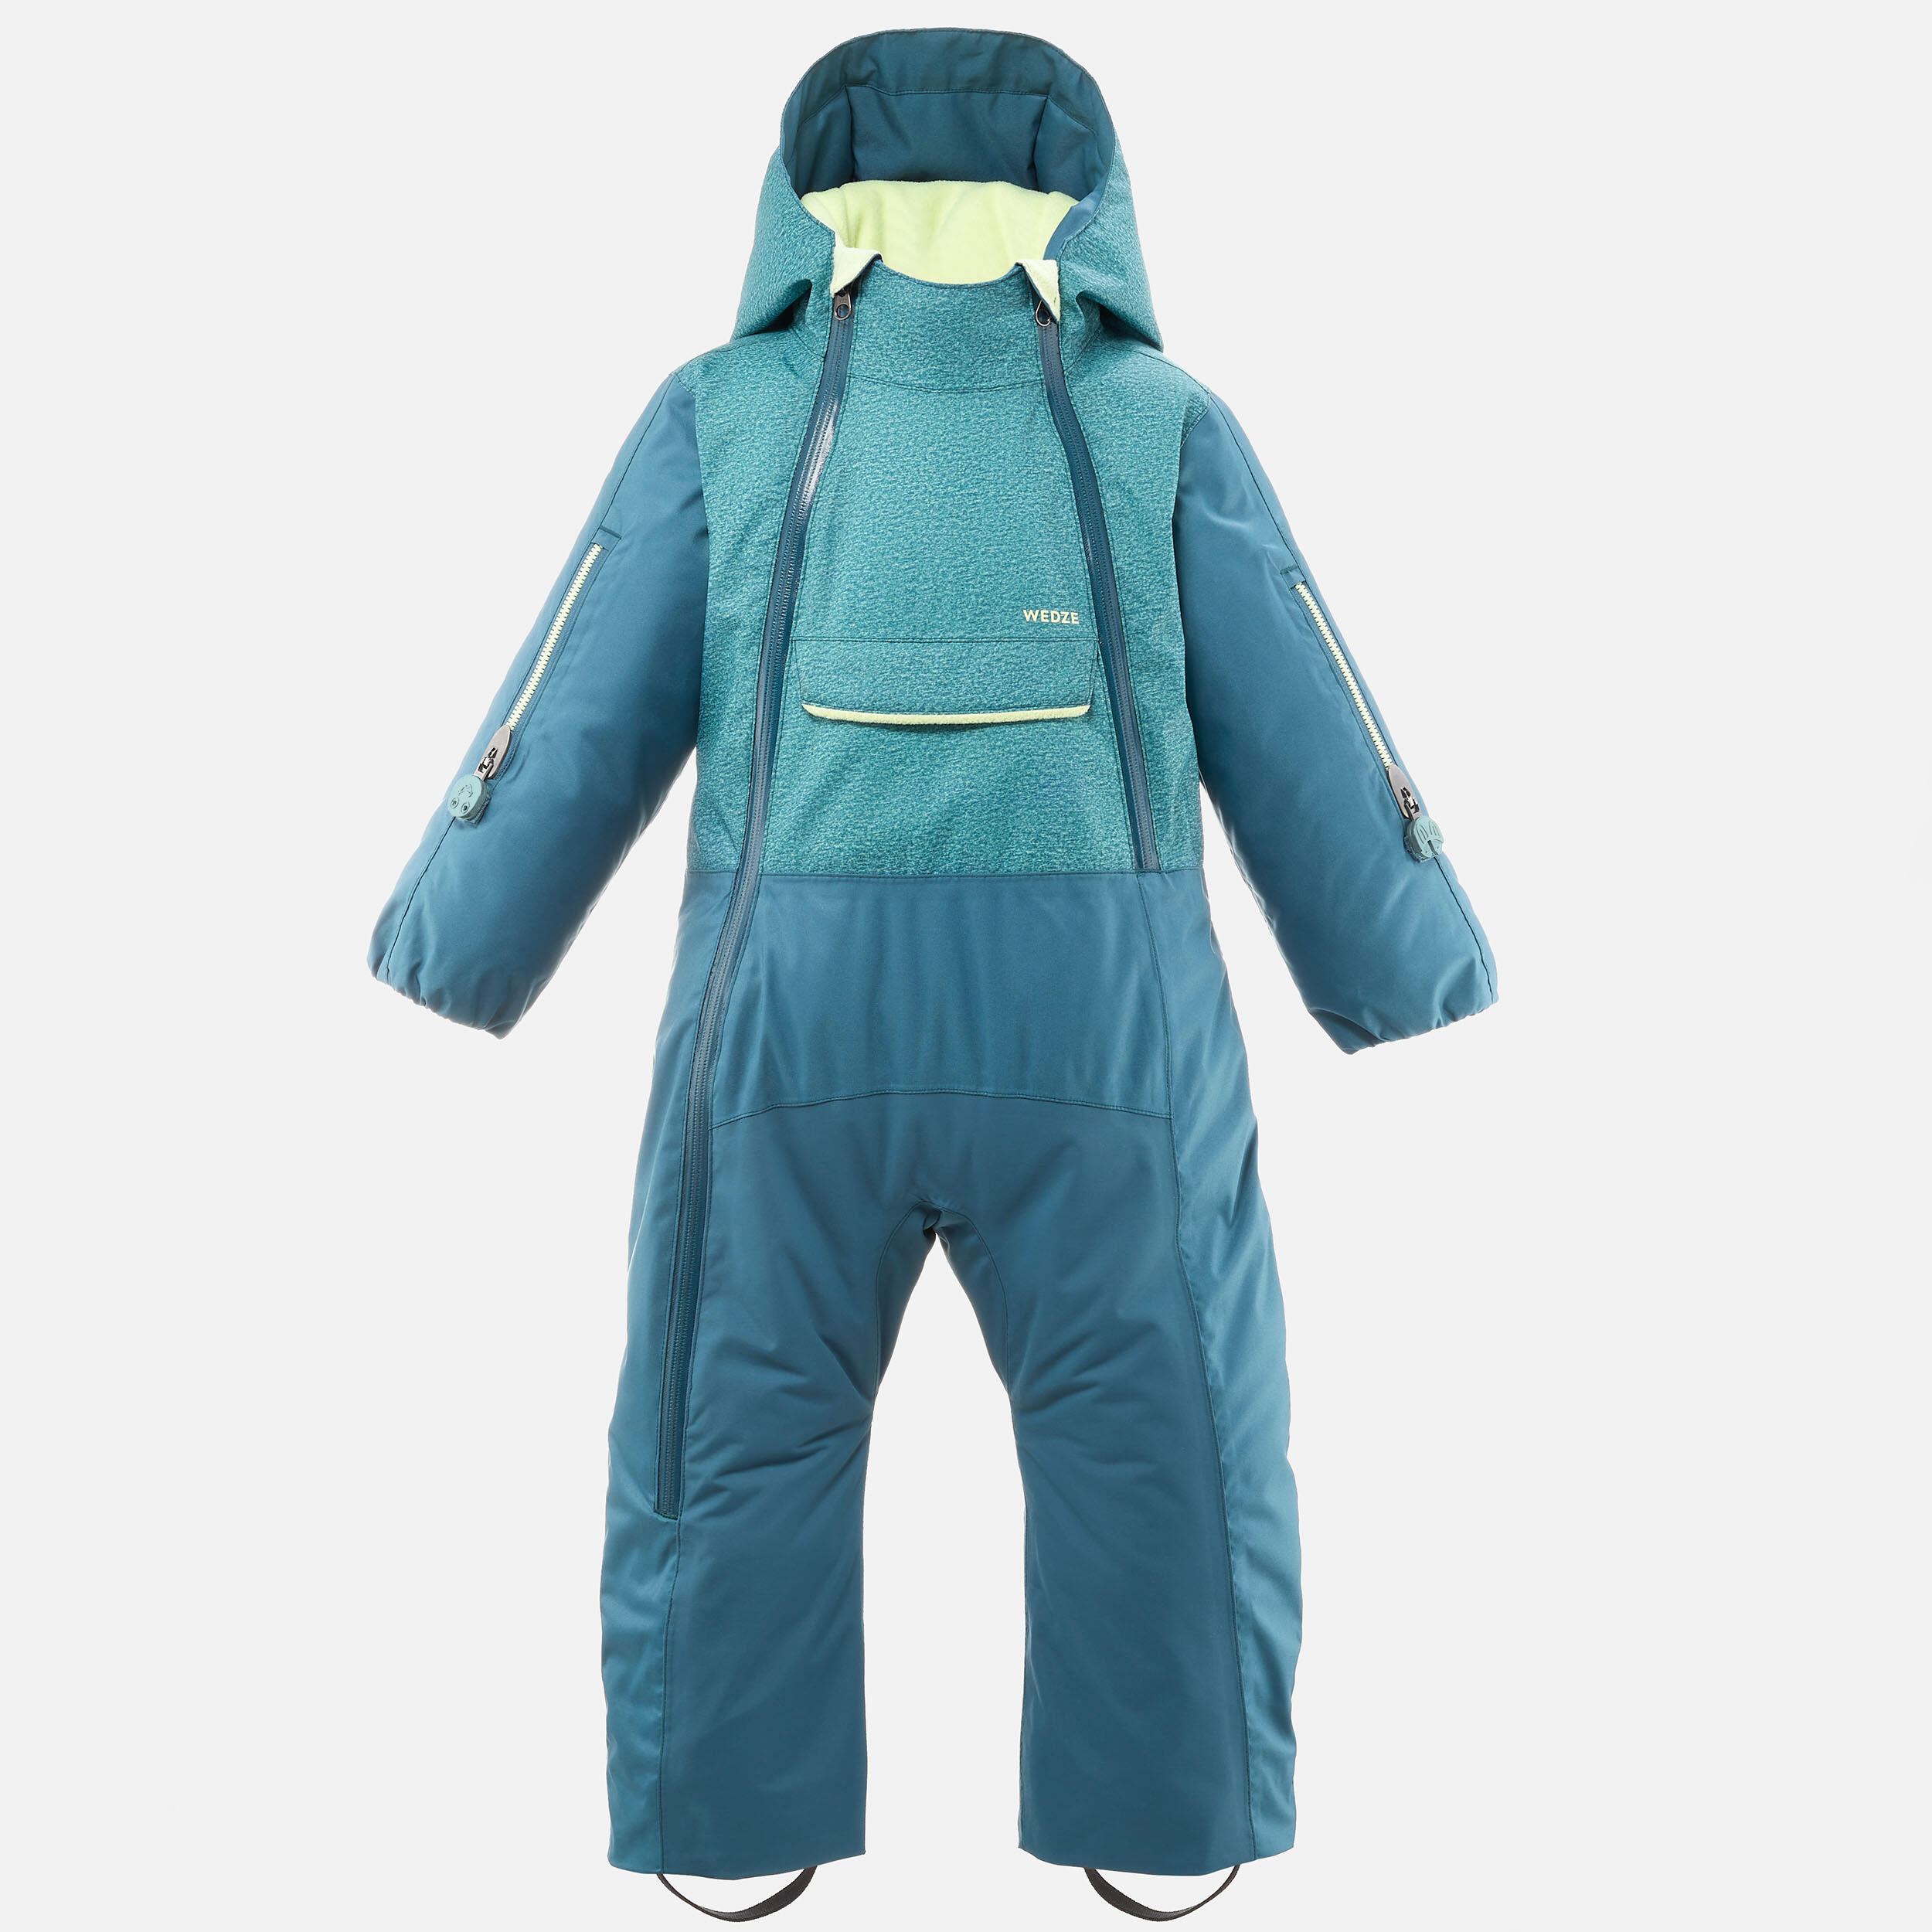 WARM AND WATERPROOF BABY SKI SUIT 900 WARM PNF LUGIKLIP - TURQUOISE 2/9